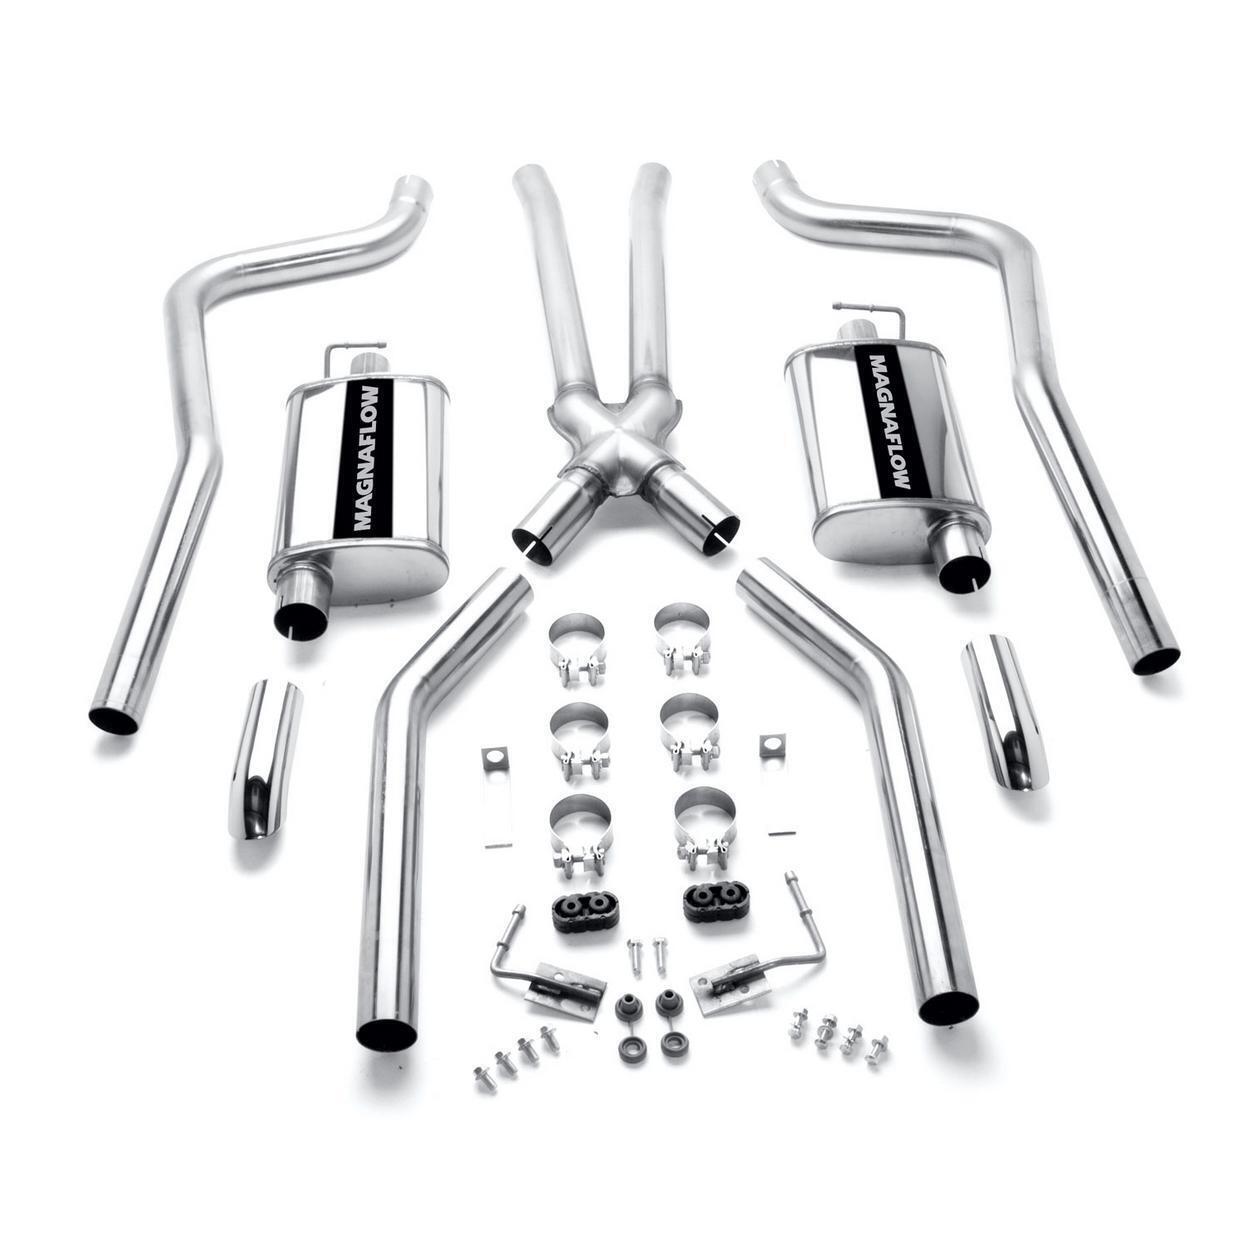 Magnaflow Exhaust System Kit for 1970 Plymouth Barracuda 5.6L V8 GAS OHV